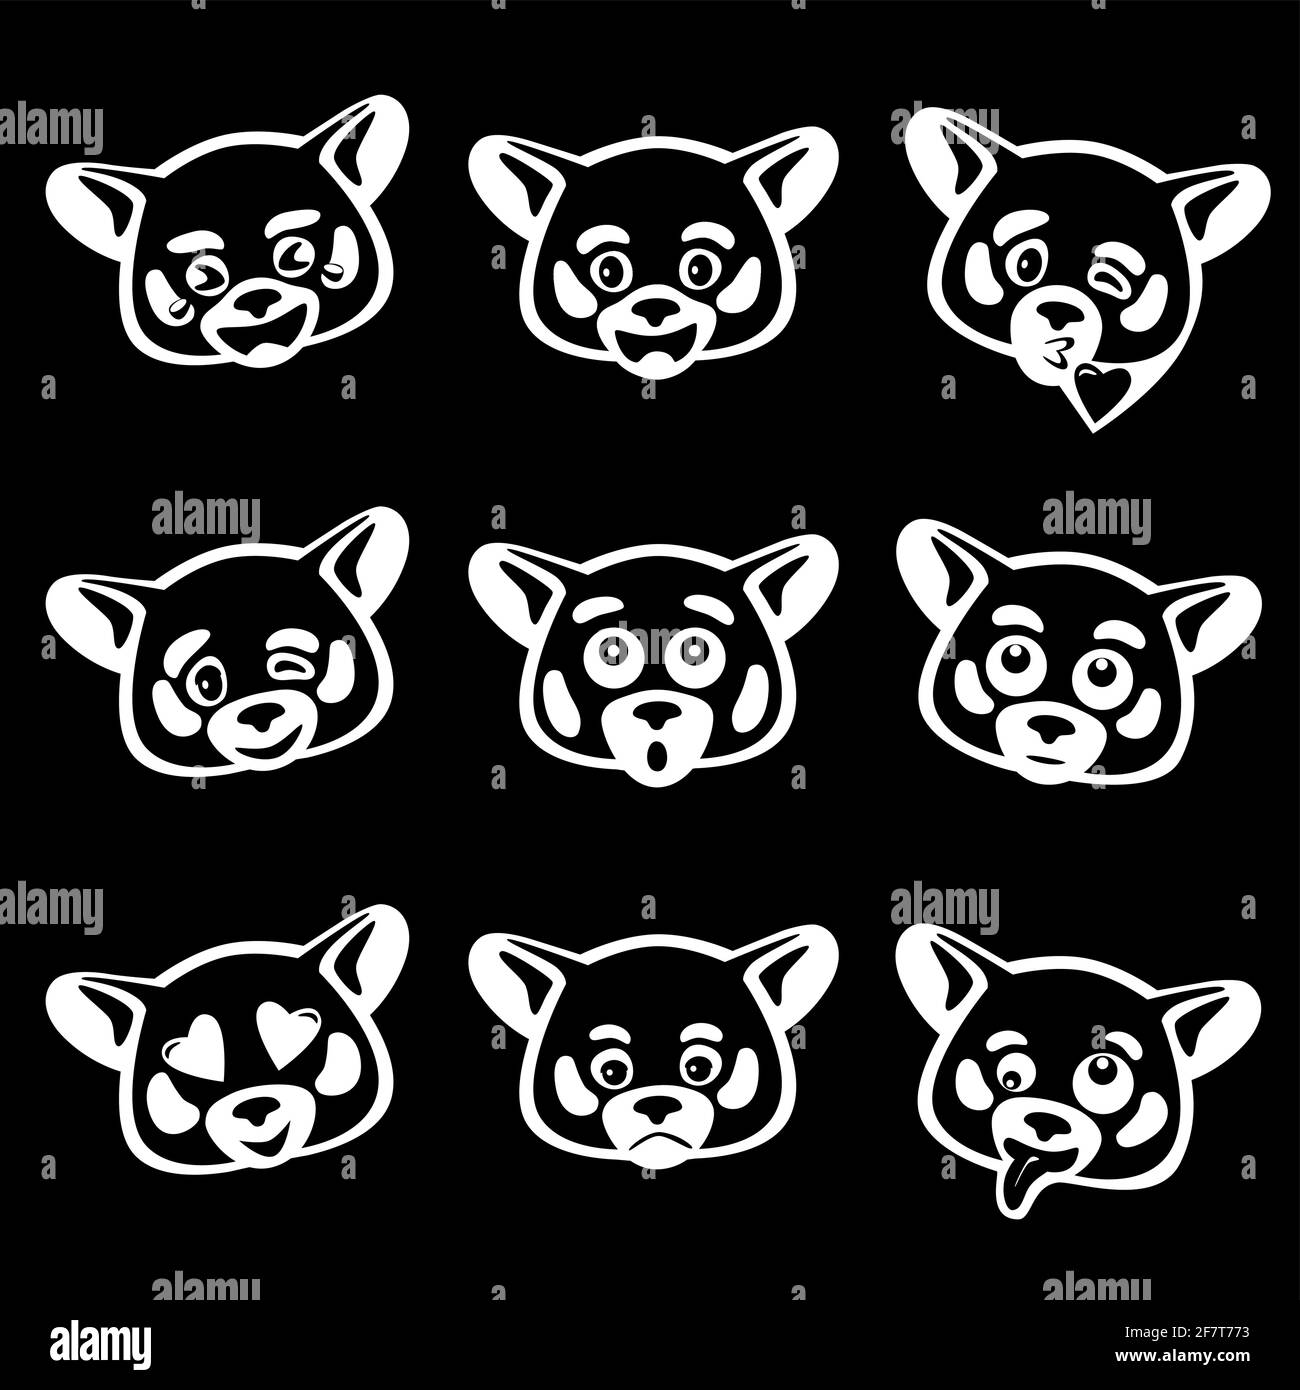 set of 9 vector emoji with red panda face in black style Stock Vector